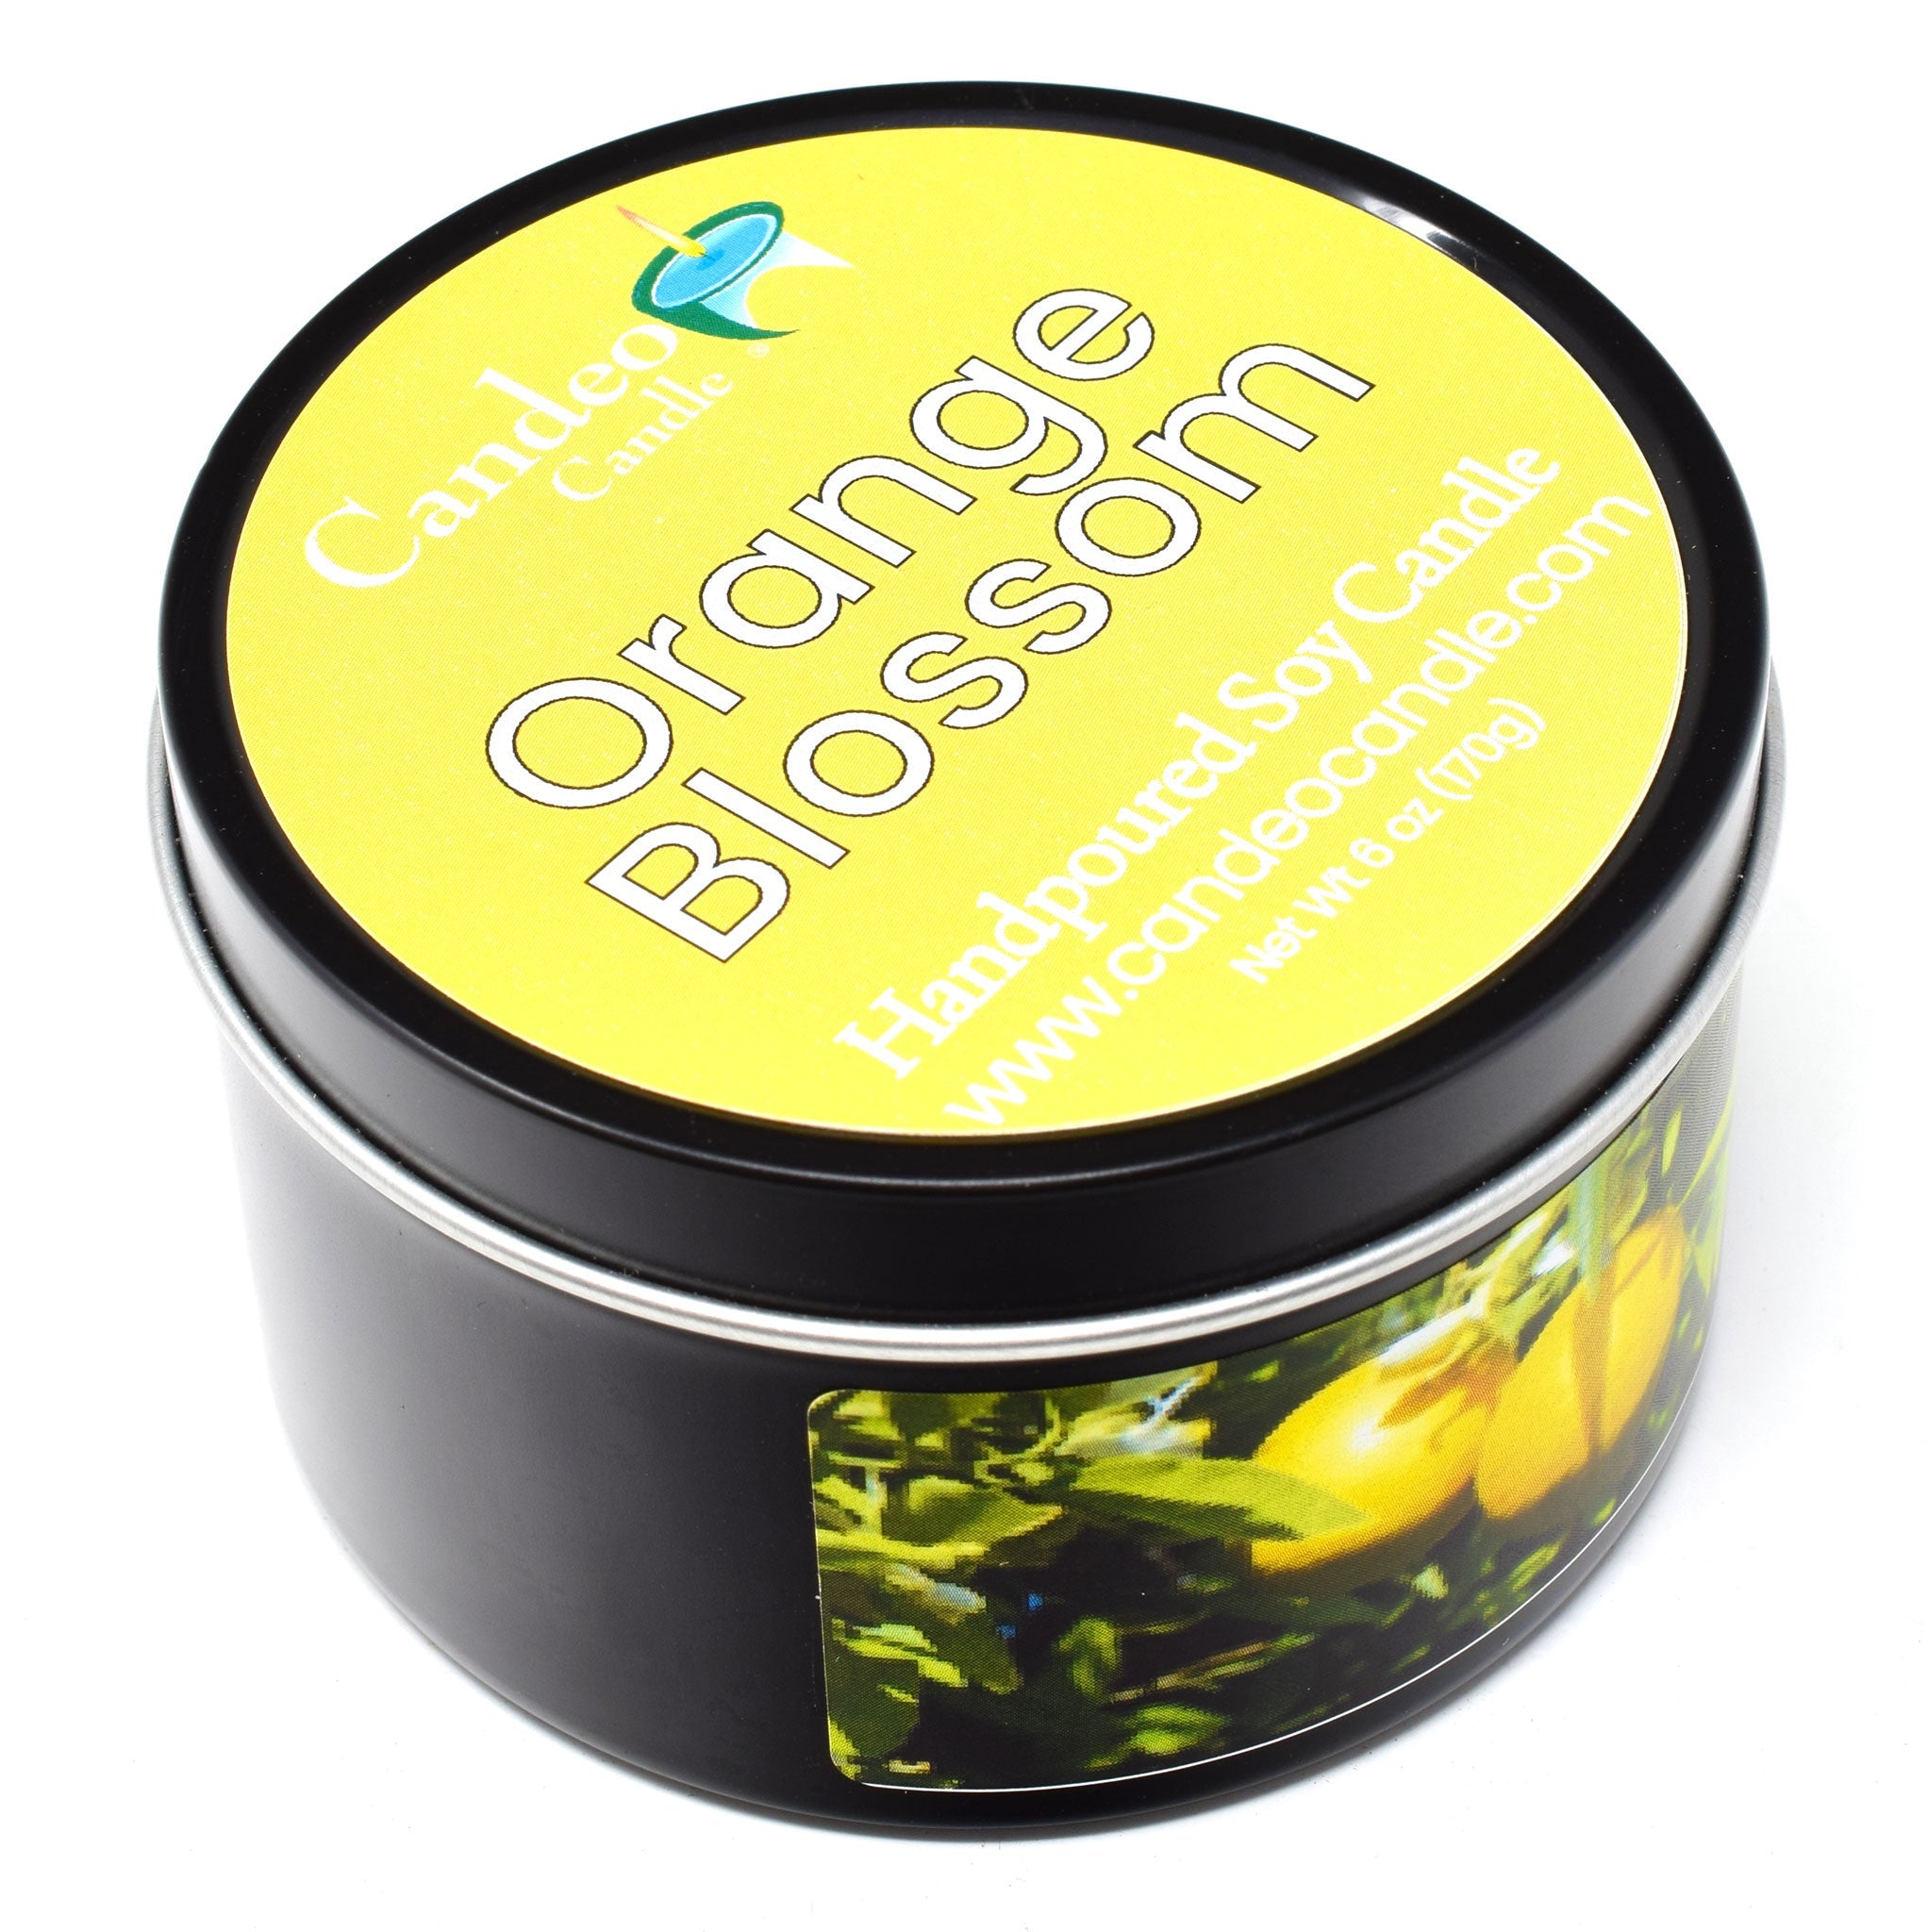 Orange Blossom, 6oz Soy Candle Tin - Candeo Candle